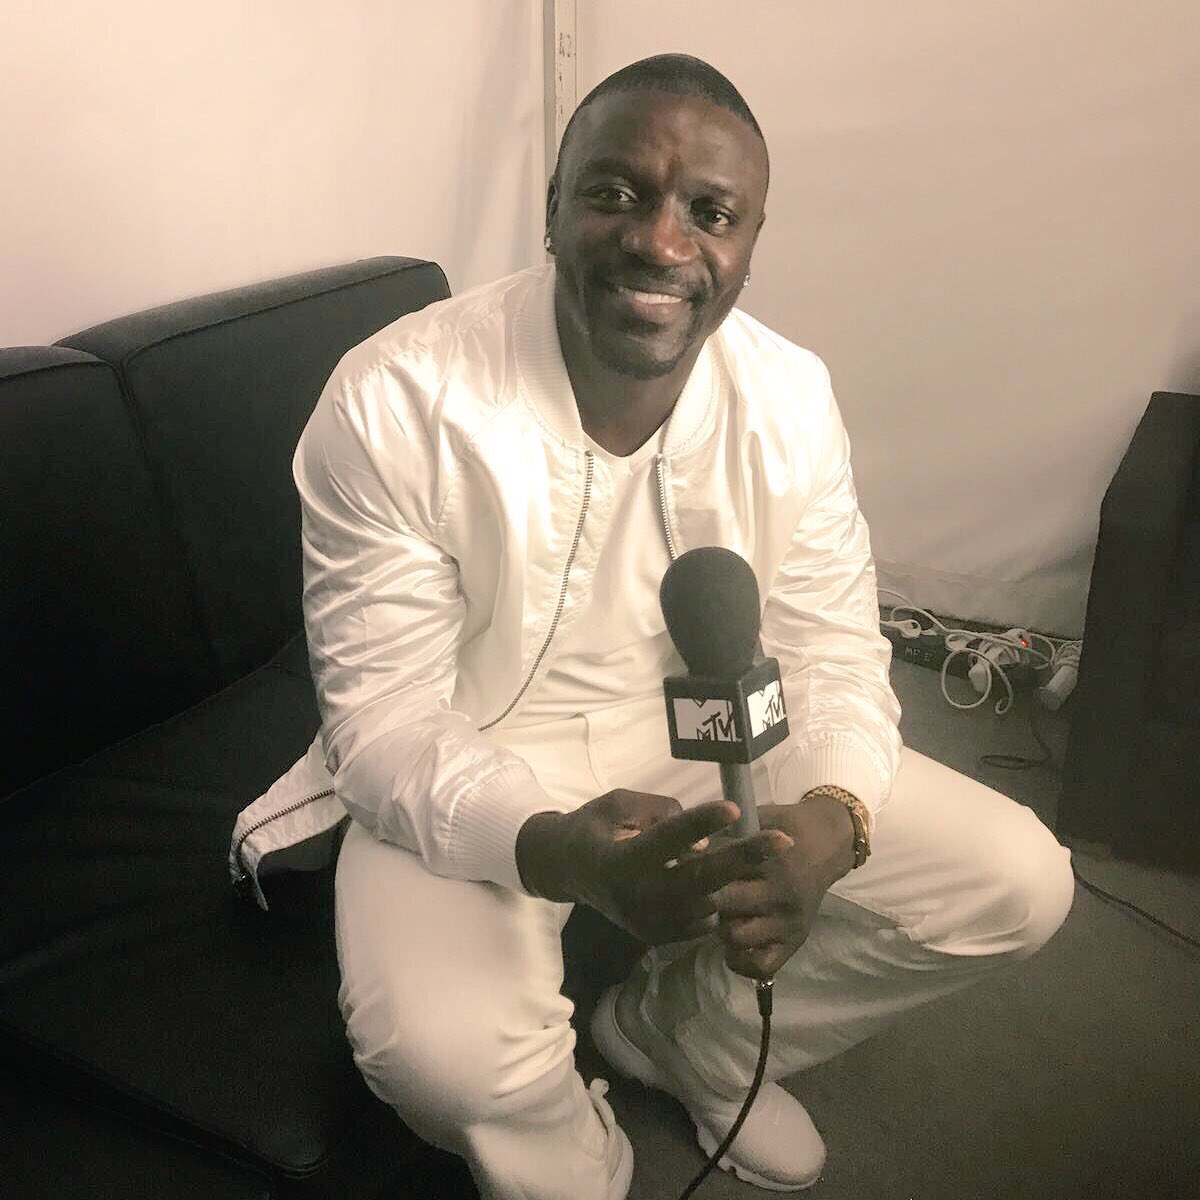 RT @MTV_Presents: We've been catching up with @Akon at @MTV_Presents EXPO Astana 2017 in Kazakhstan! ???????? https://t.co/ywnQTKTjY2